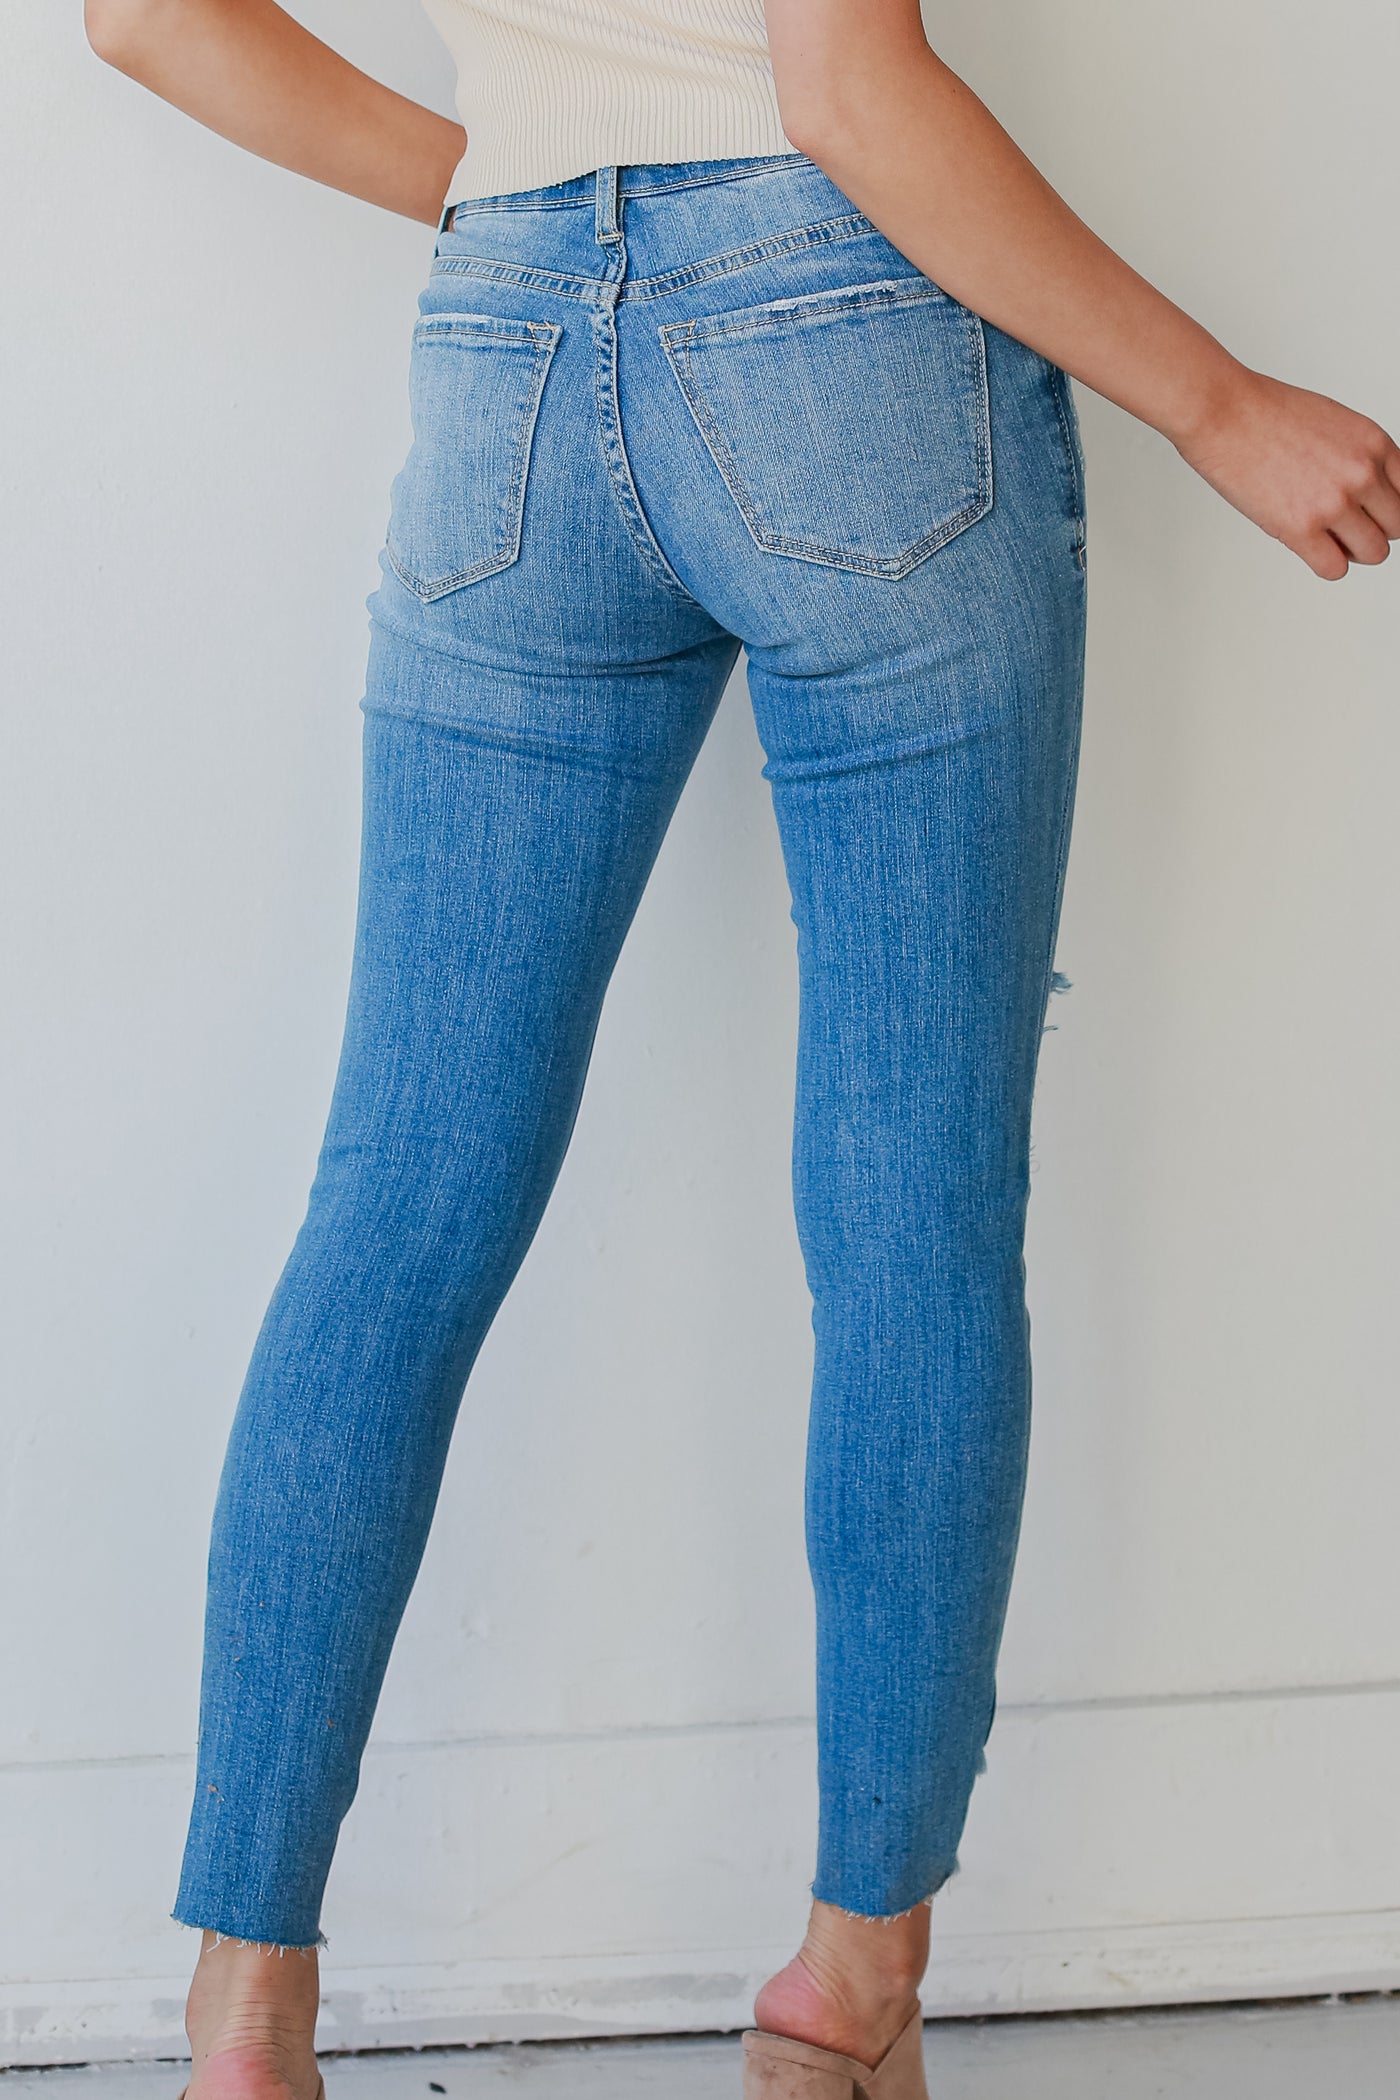 Distressed Skinny Jeans back view